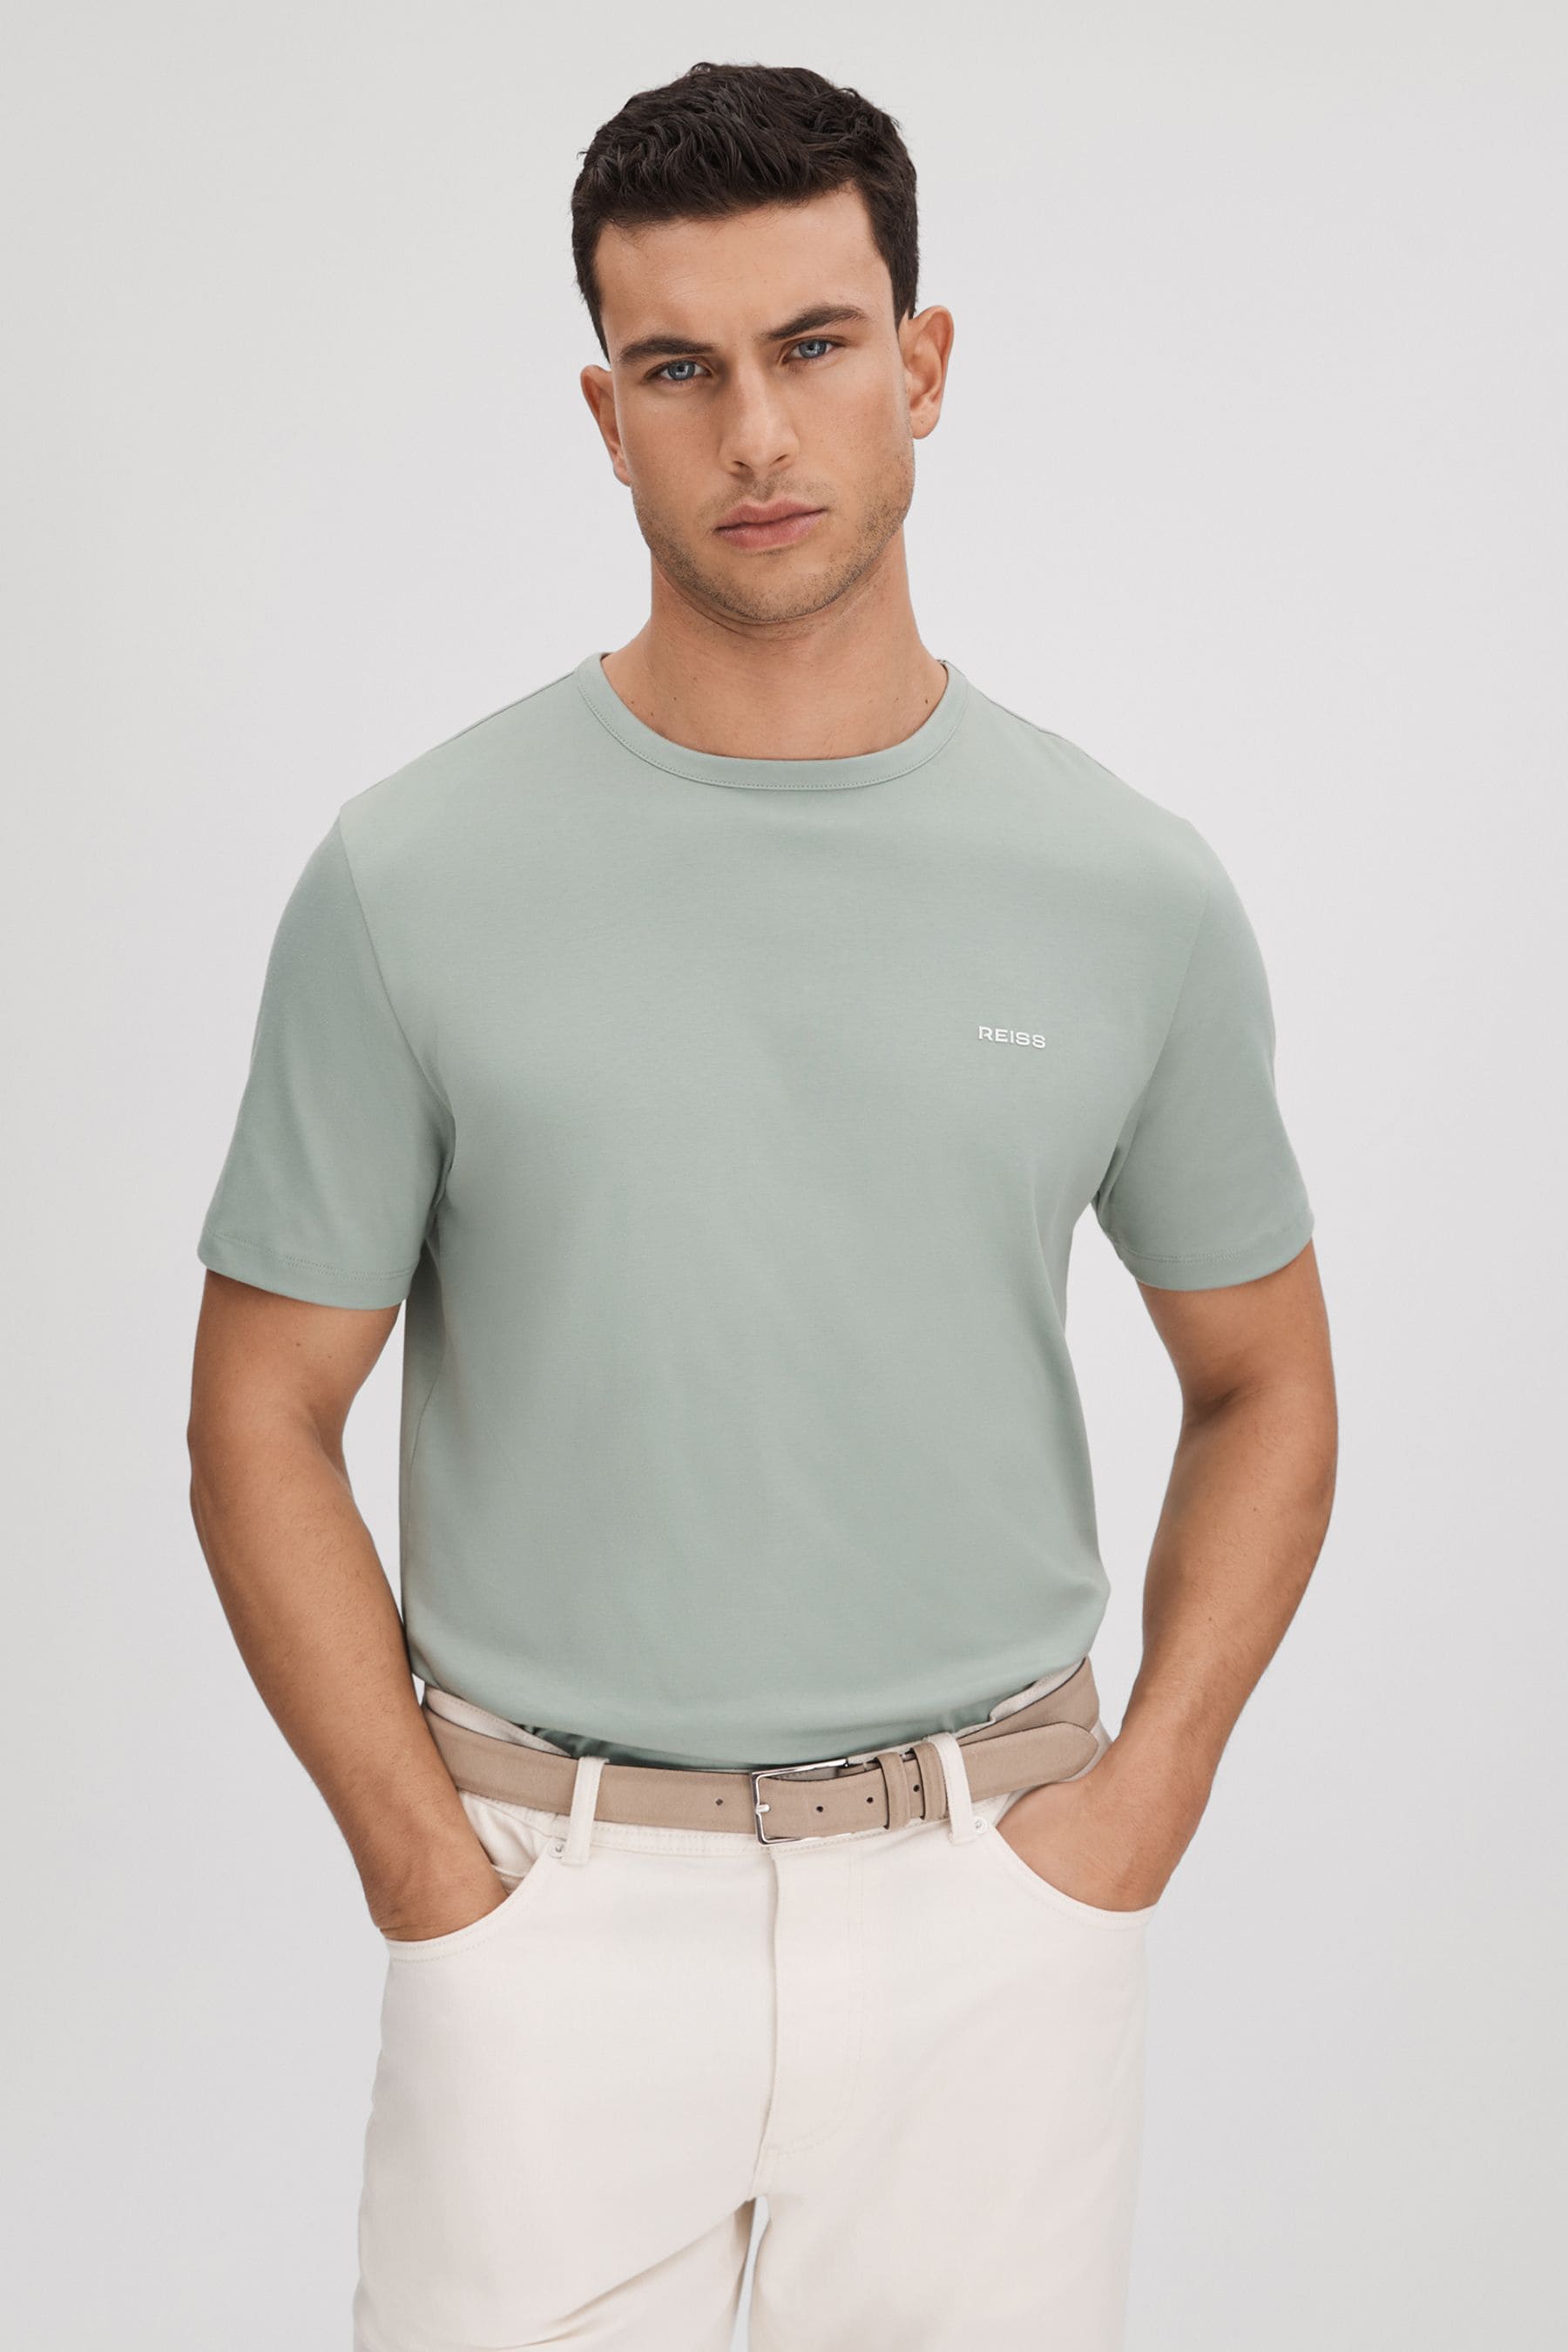 Reiss Russell - Sage Slim Fit Cotton Crew T-shirt, L